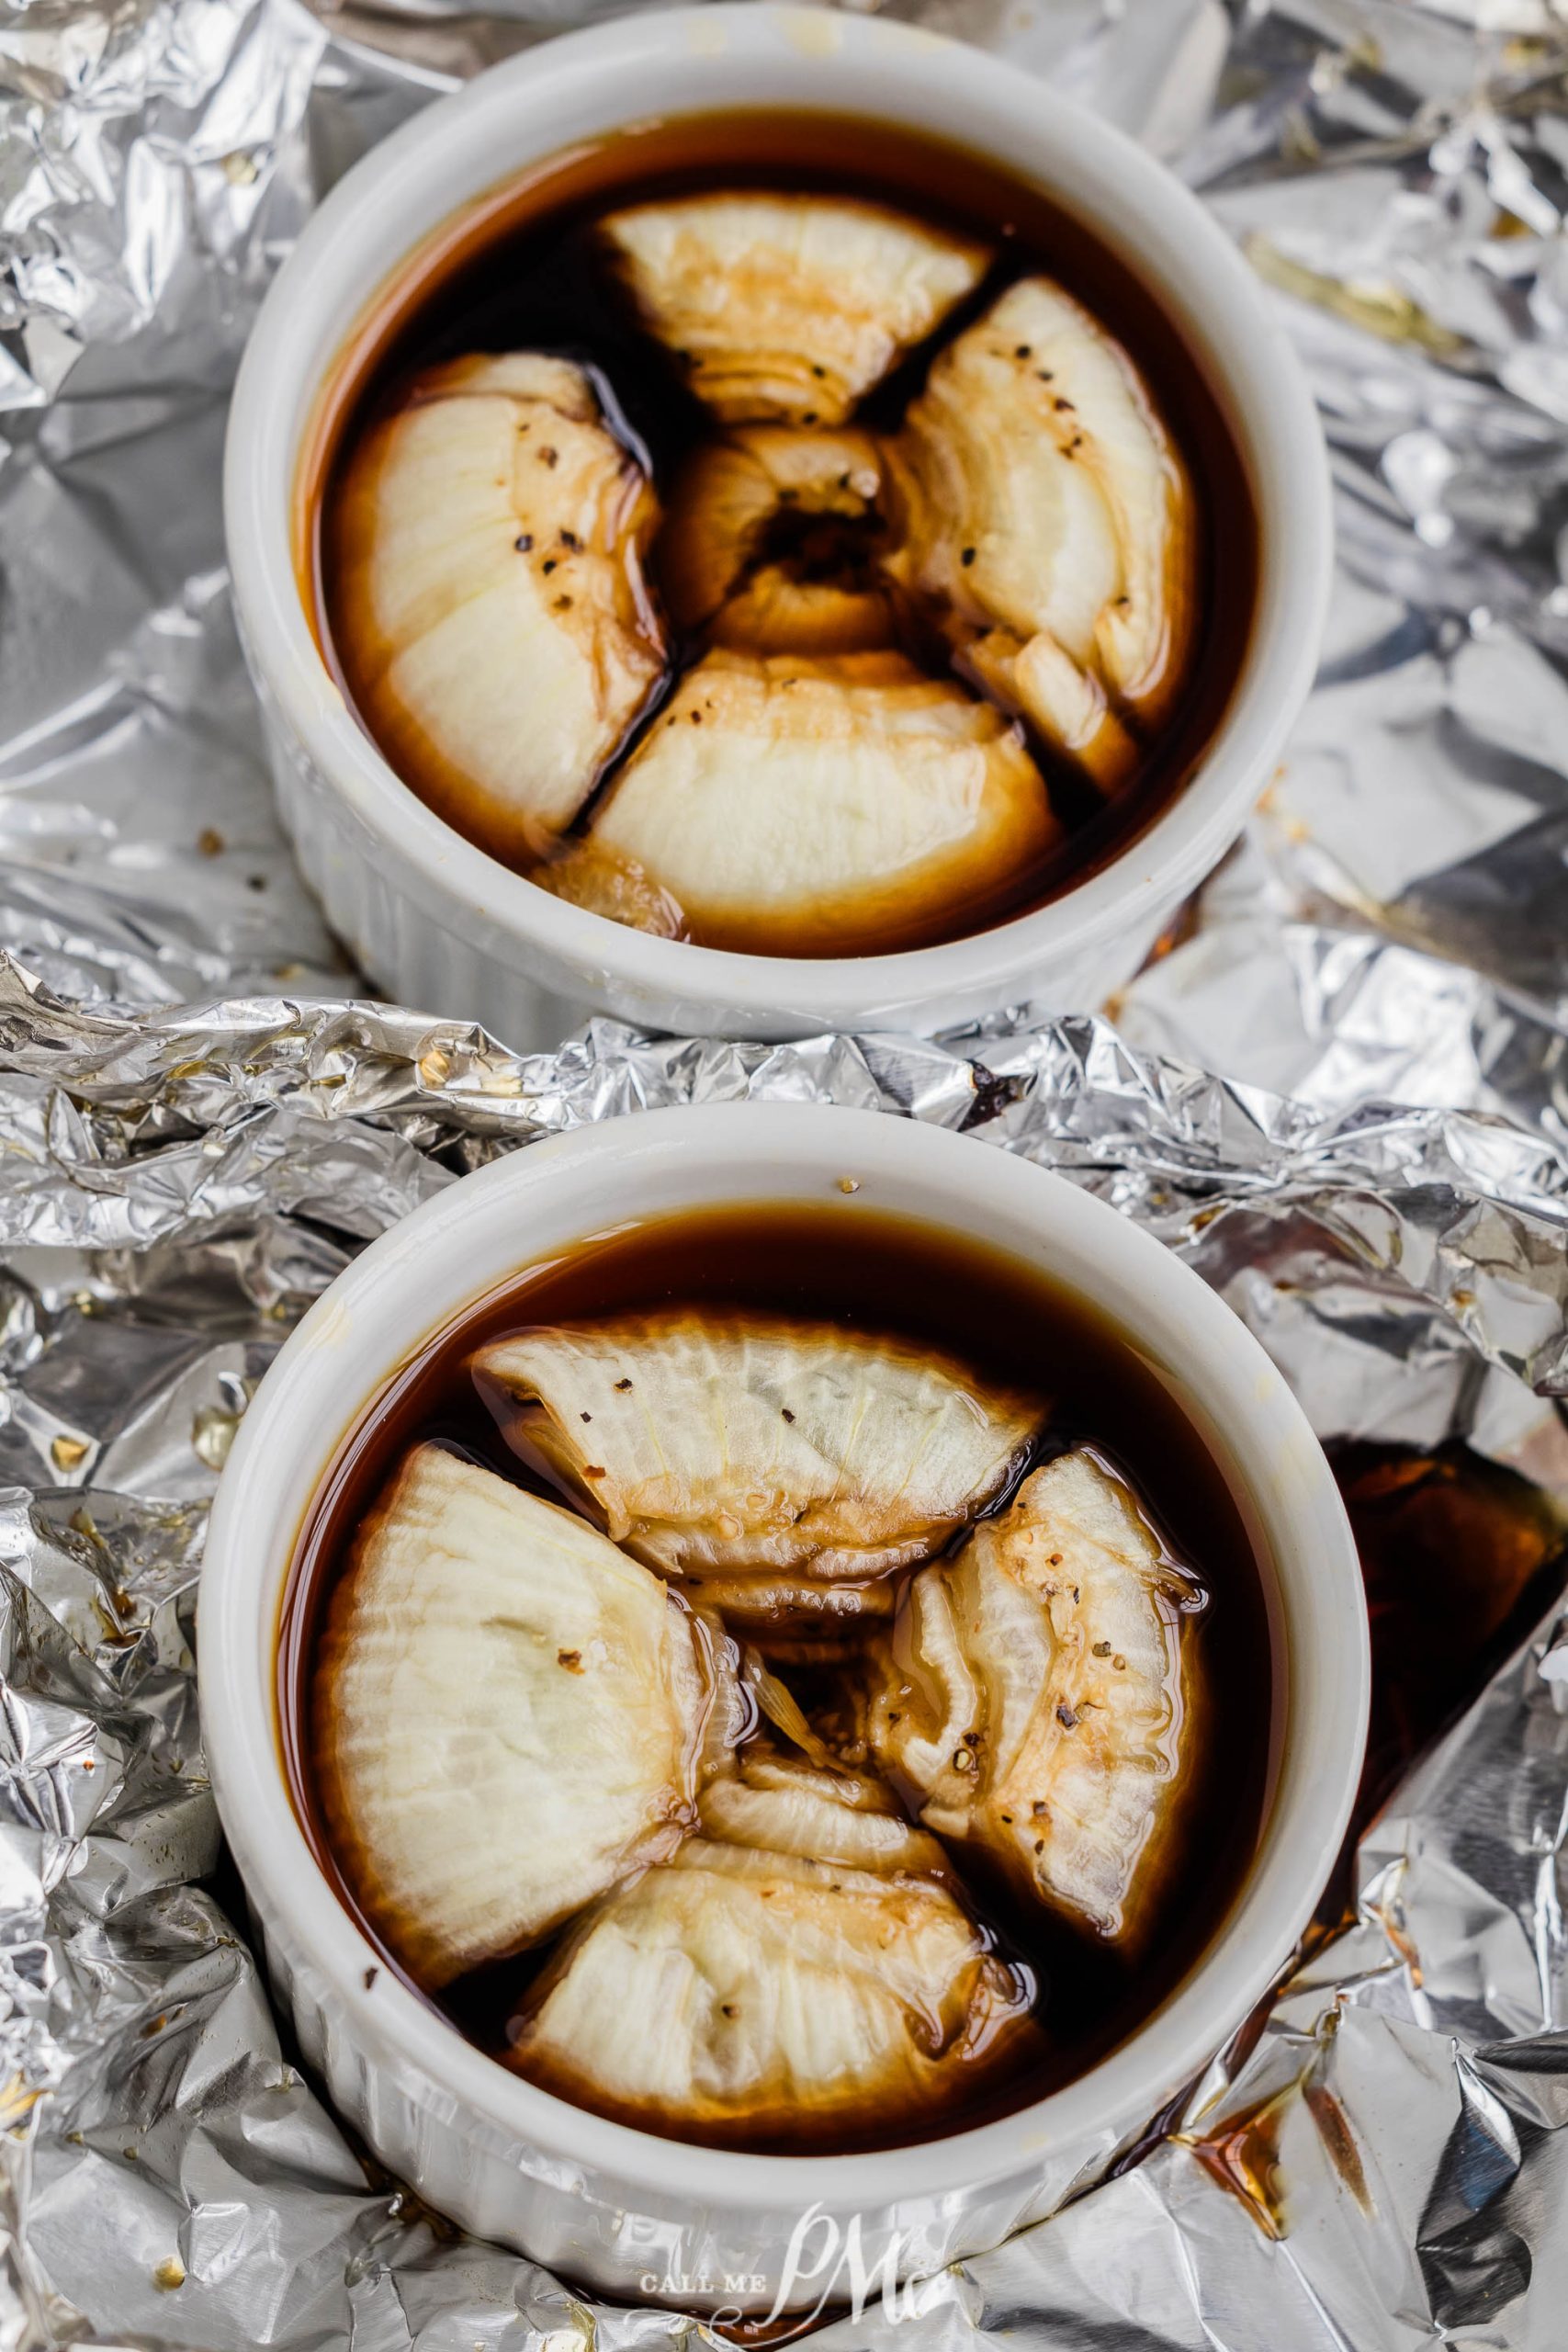 Two white ramekins containing sliced onions in a dark liquid, placed on a surface covered with aluminum foil.